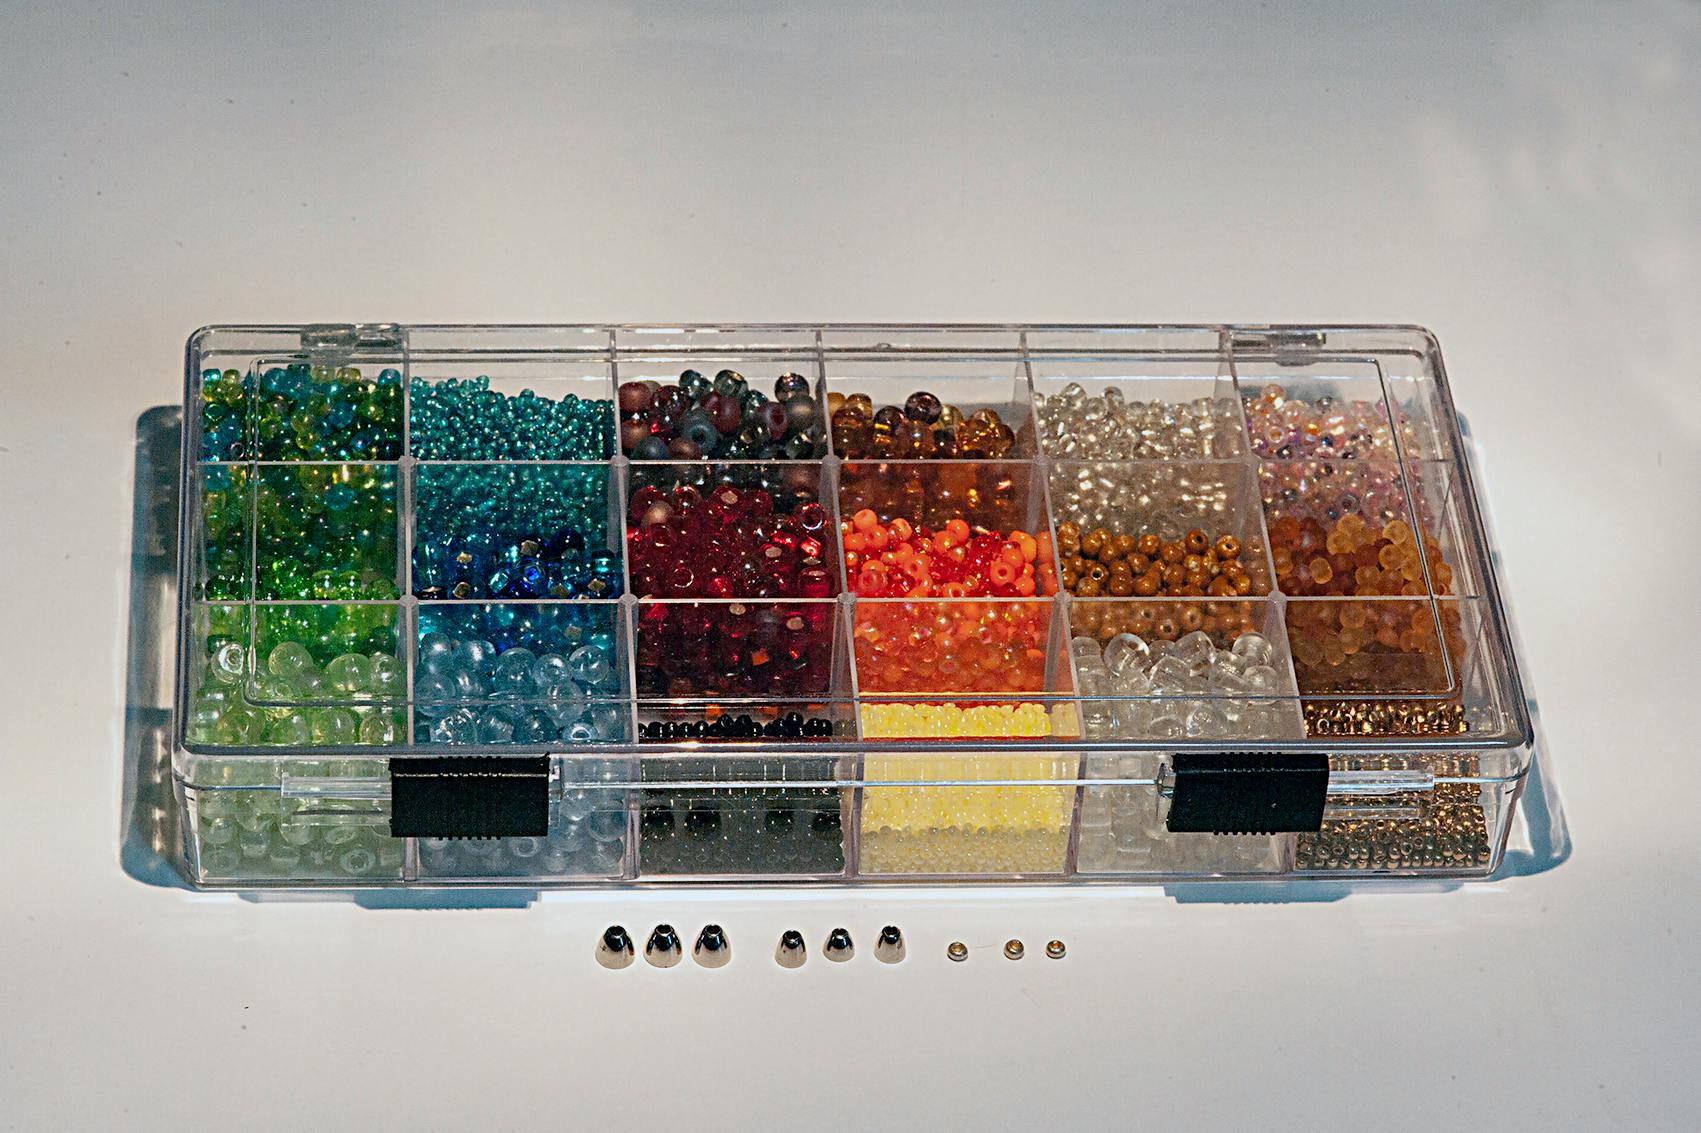 A container of beads for tying flies. There are several colored beads in blues, greens, oranges, and browns. There are a few silver ones sitting outside of the box in different sizes.